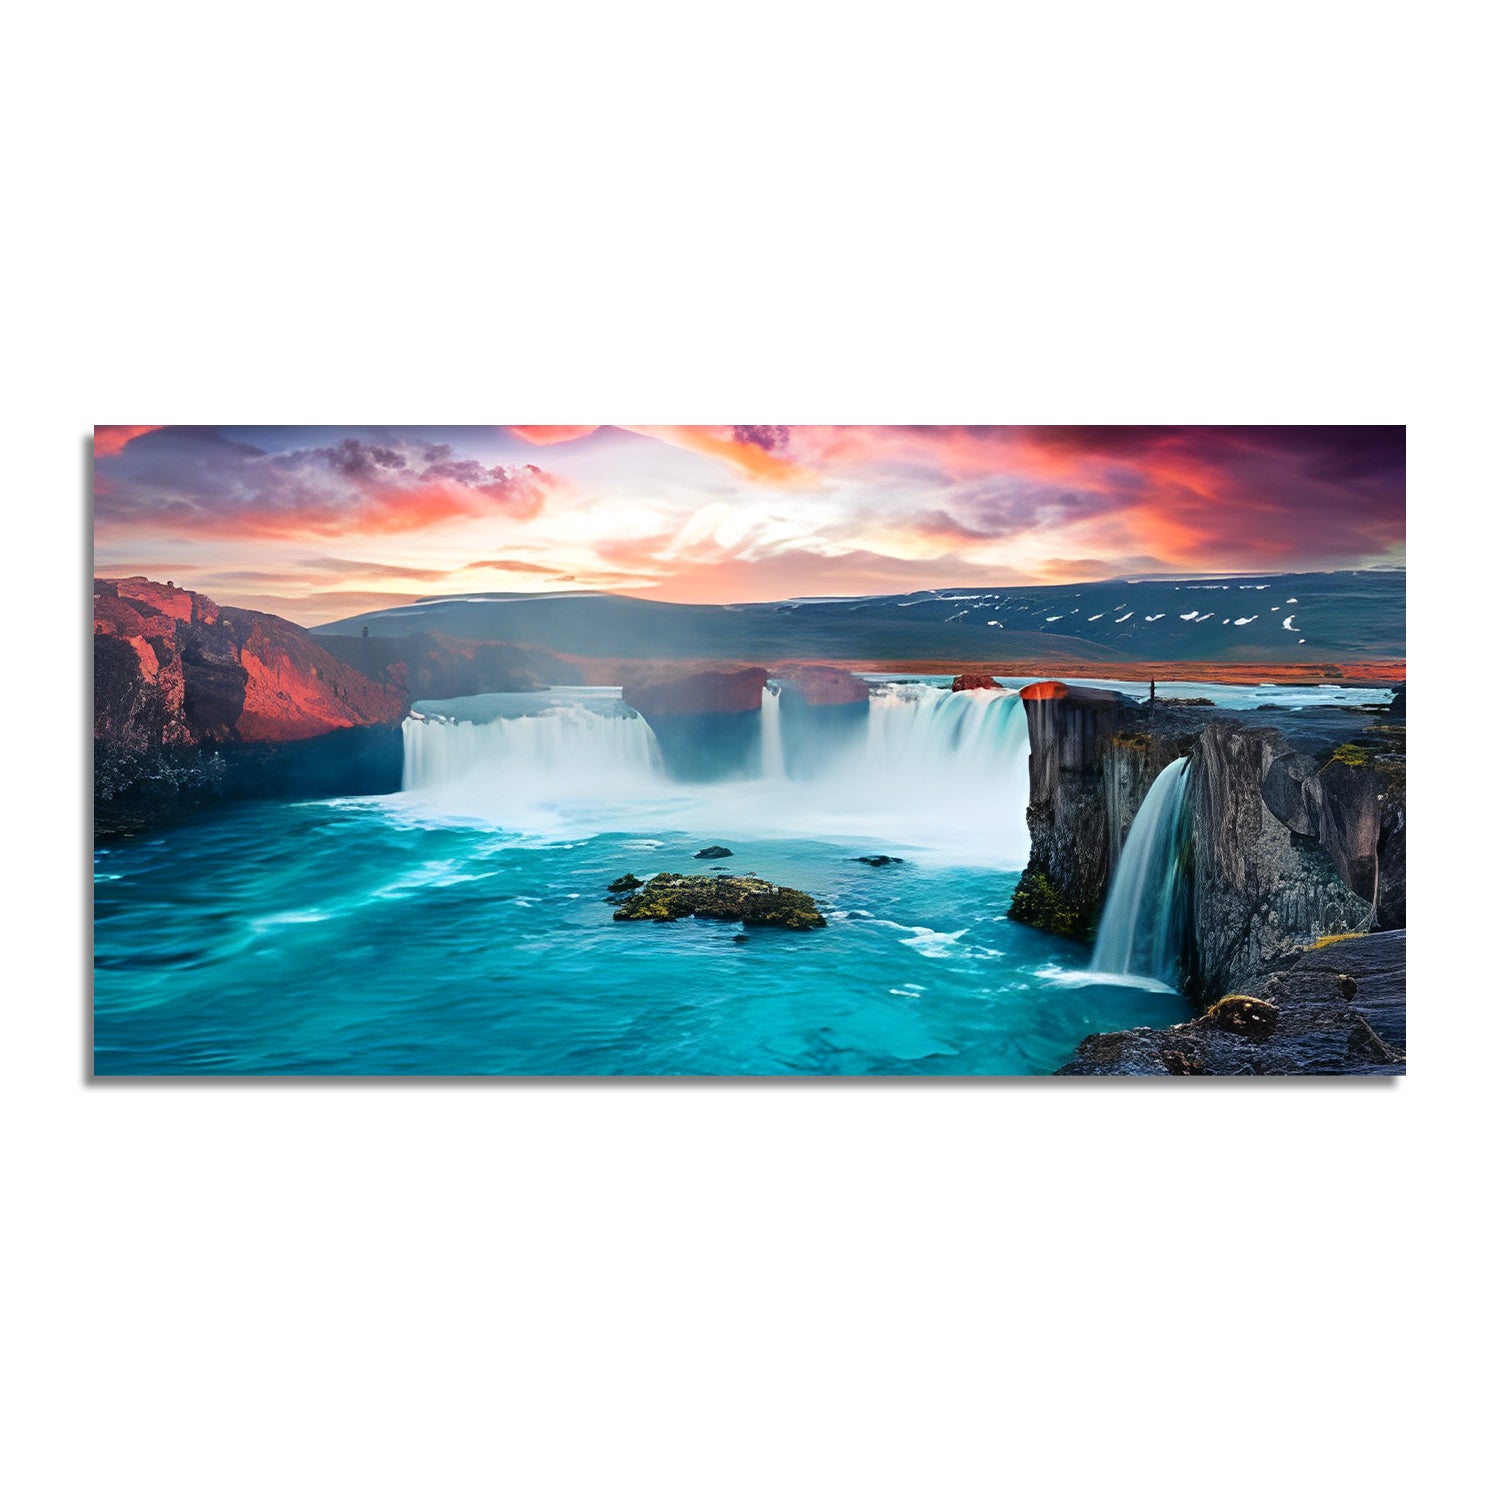 Modern Sunset Lake Forest Natural Scenery 3D Mural CanVas Wall Painting